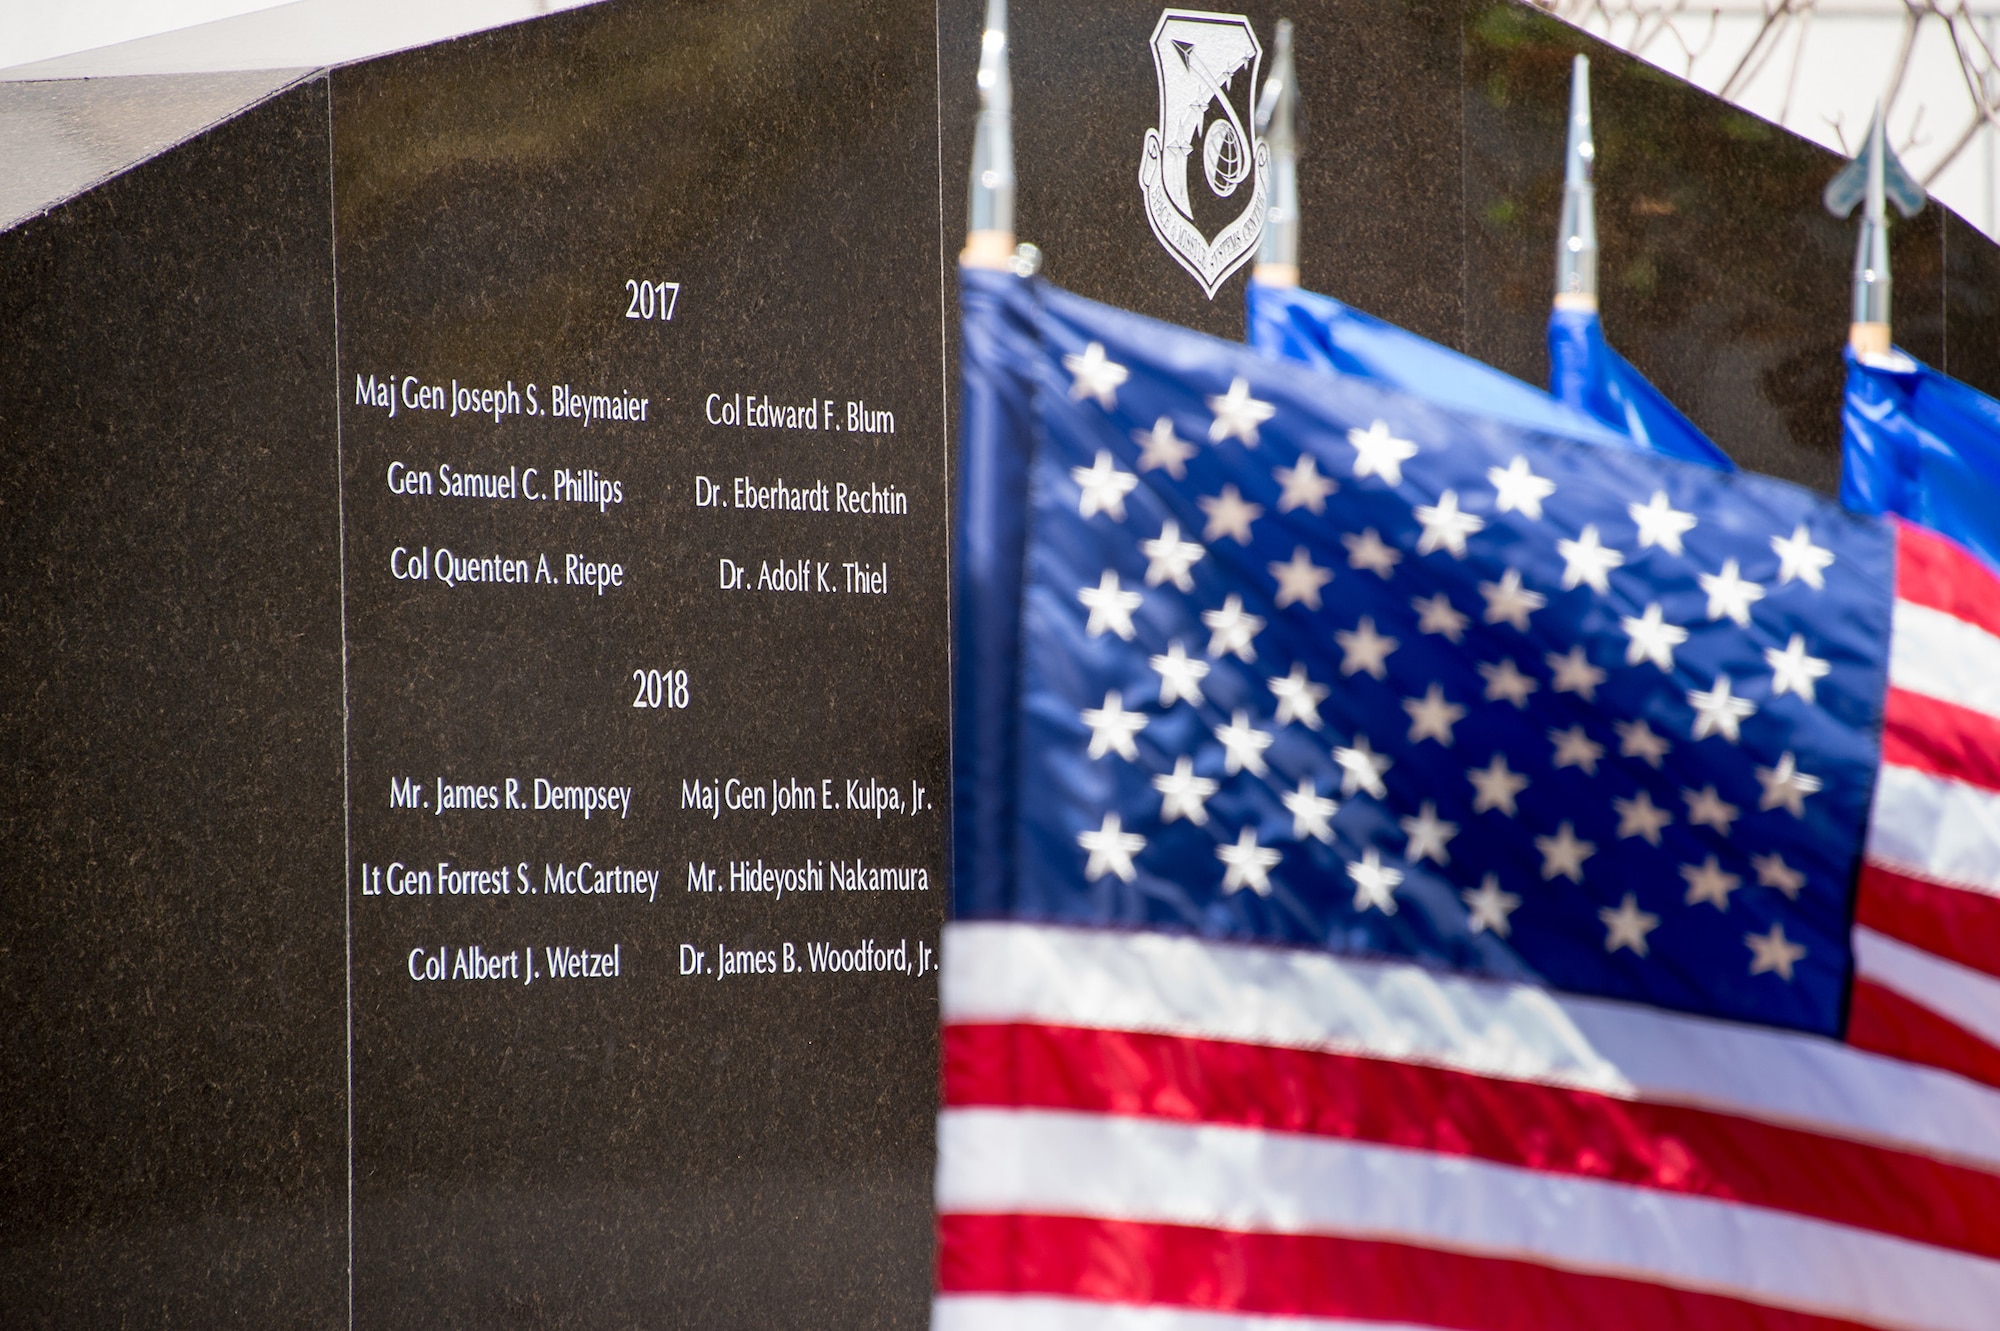 Six newly inducted Air Force and civilian space pioneers are inscribed on a wall of polished black granite at the General Bernard A. Schriever Memorial, located on the grounds of the Space and Missile Systems Center at Los Angeles Air Force Base in El Segundo, California, May 14, 2018. (U.S. Air Force photo/Van De Ha)